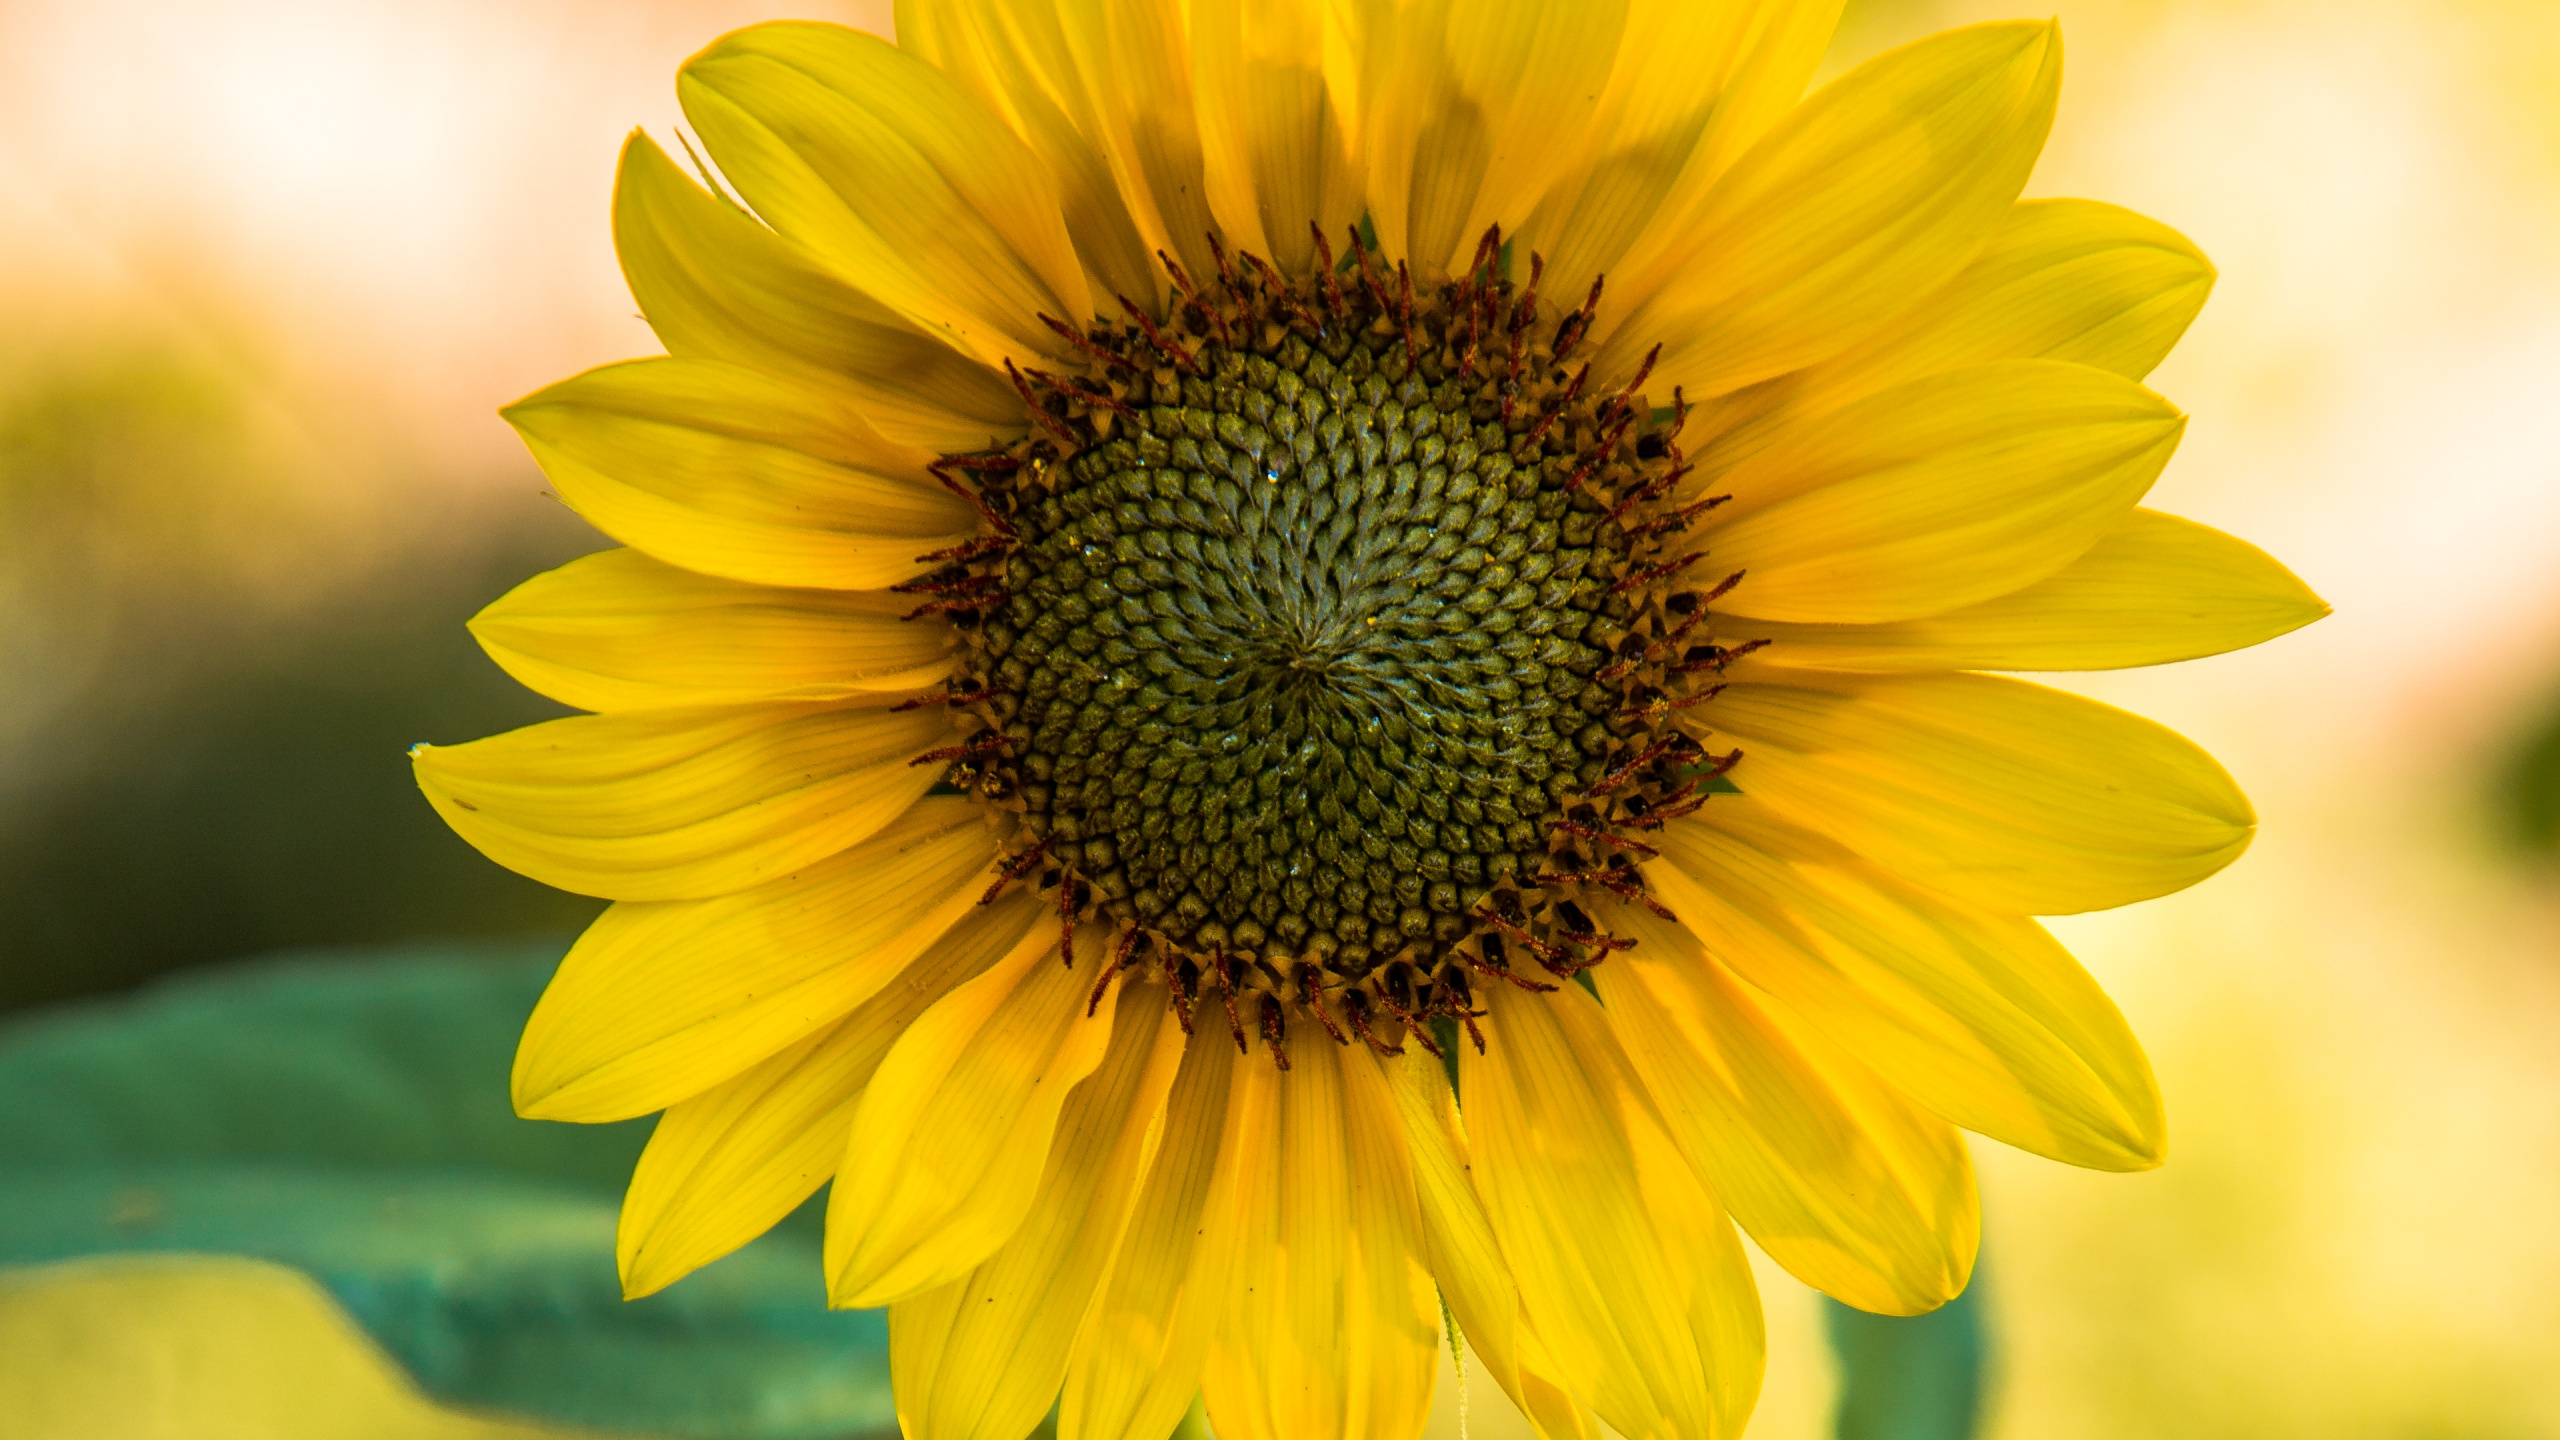 Yellow Sunflower in Close up Photography. Wallpaper in 2560x1440 Resolution